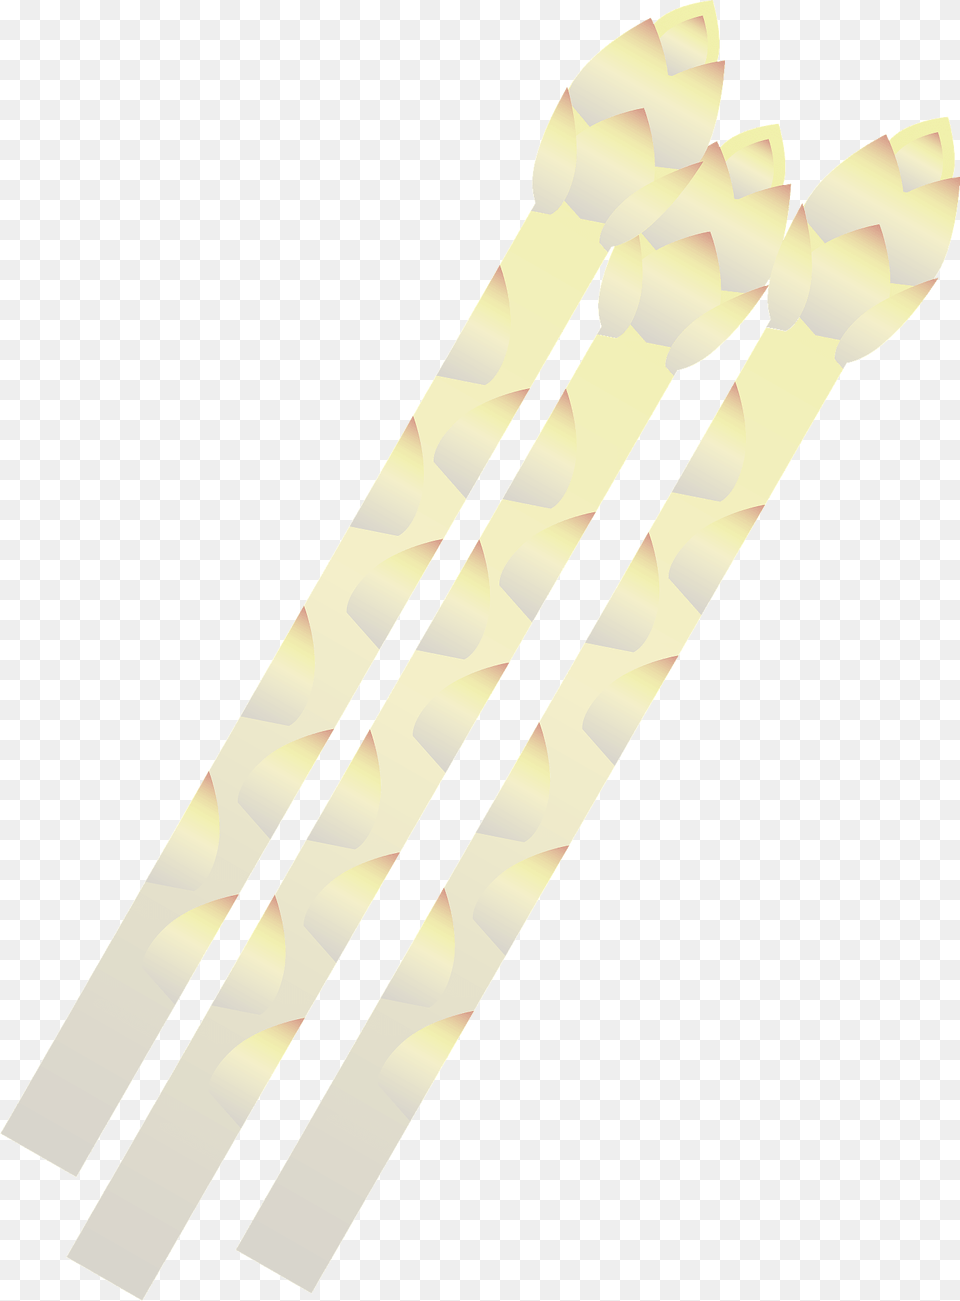 White Asparagus Stalks Clipart, Cutlery, Fork, Spoon Png